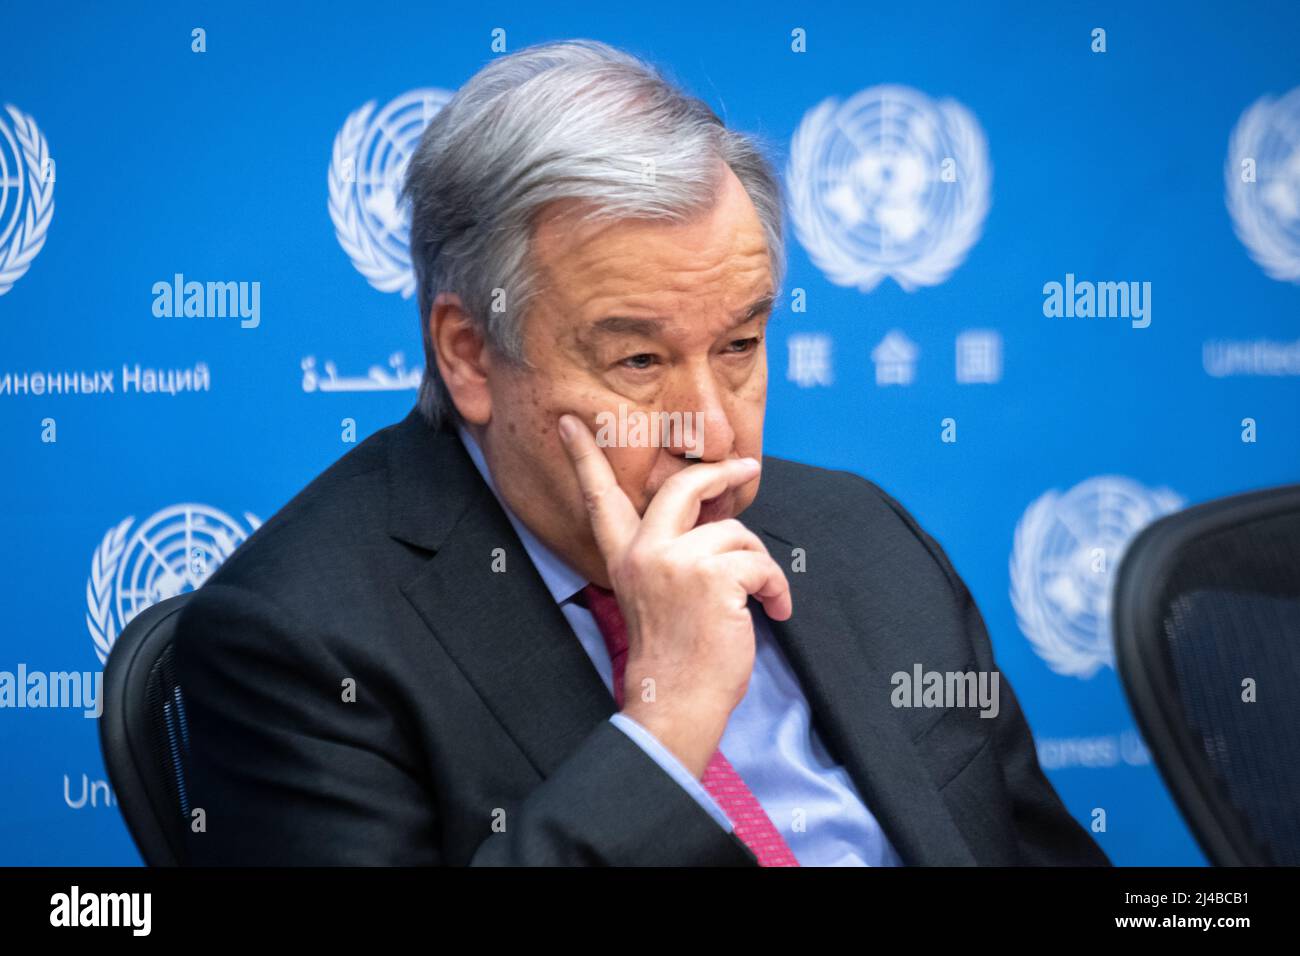 New York, USA. 13th Apr, 2022. United Nations Secretary-General Antonio Guterres speaks at the UN headquarters in New York City. Guterres presented a UN report on the global impact of war in Ukraine on food, energy and finance systems, and said that ' A humanitarian ceasefire in Ukraine does not seem possible at the moment'. Credit: Enrique Shore/Alamy Live News Stock Photo